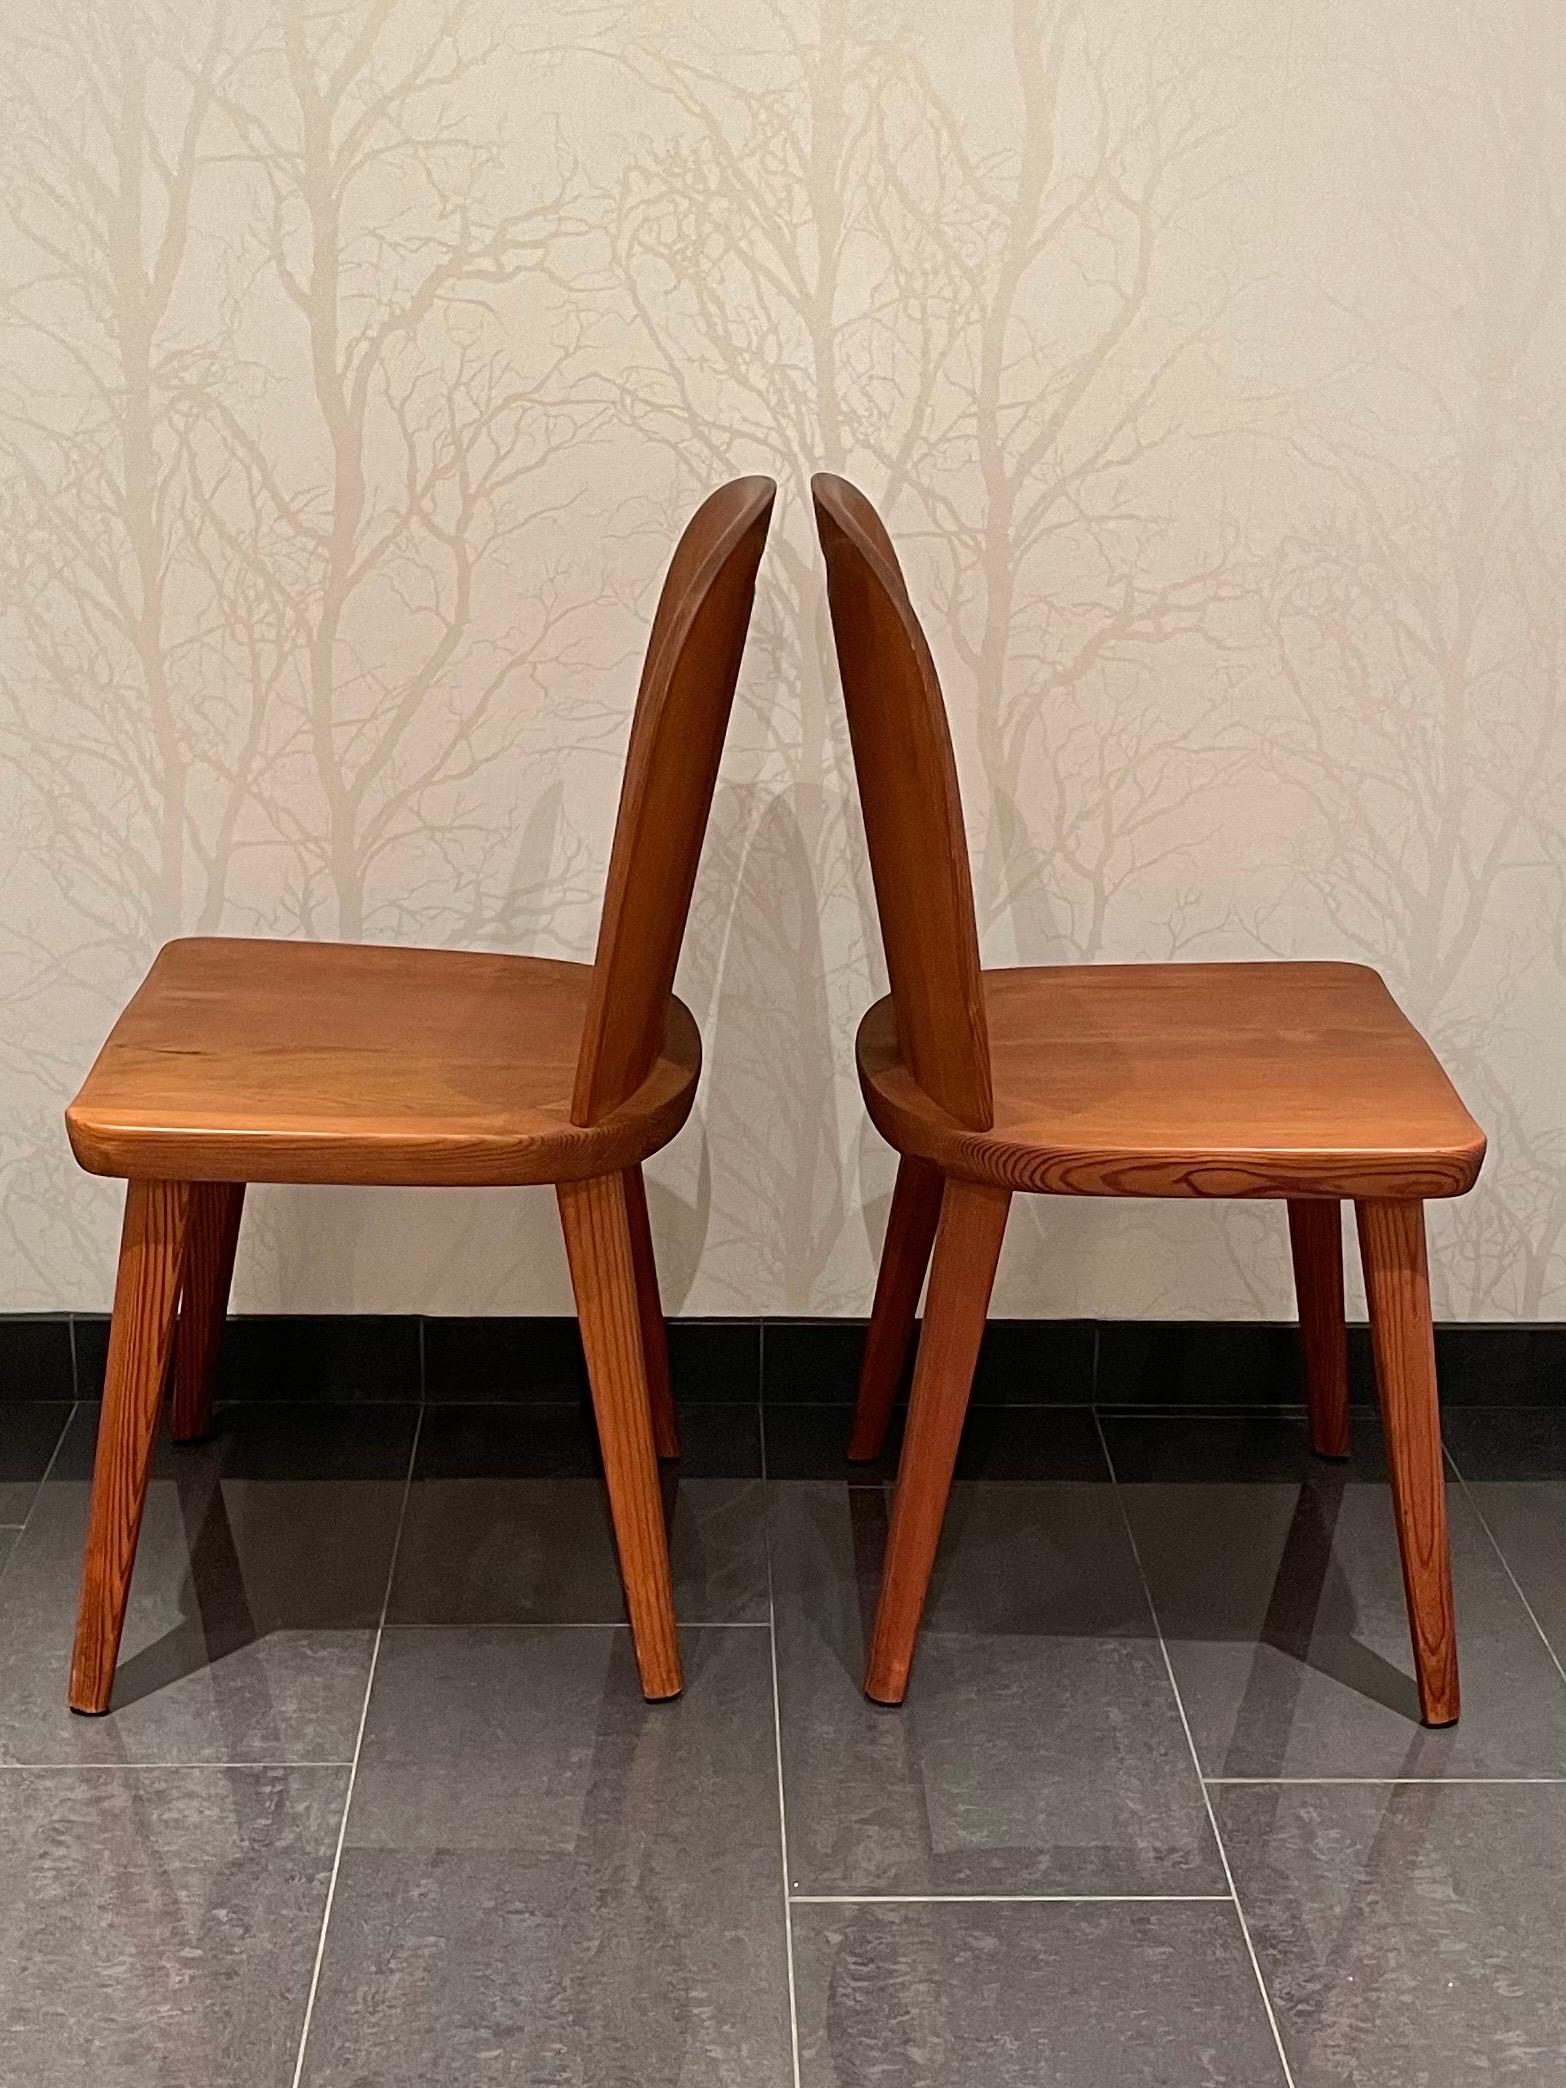 This is the Lövåsen solid pine pair of chairs manufactured in southern Sweden by Åby Möbelfabrik in the 1930/40s. 

It comes in a robust sports cabin lock in the Swede Axel Einar Hjorth style. 
They are maid of solid pine. The shape appears rounded